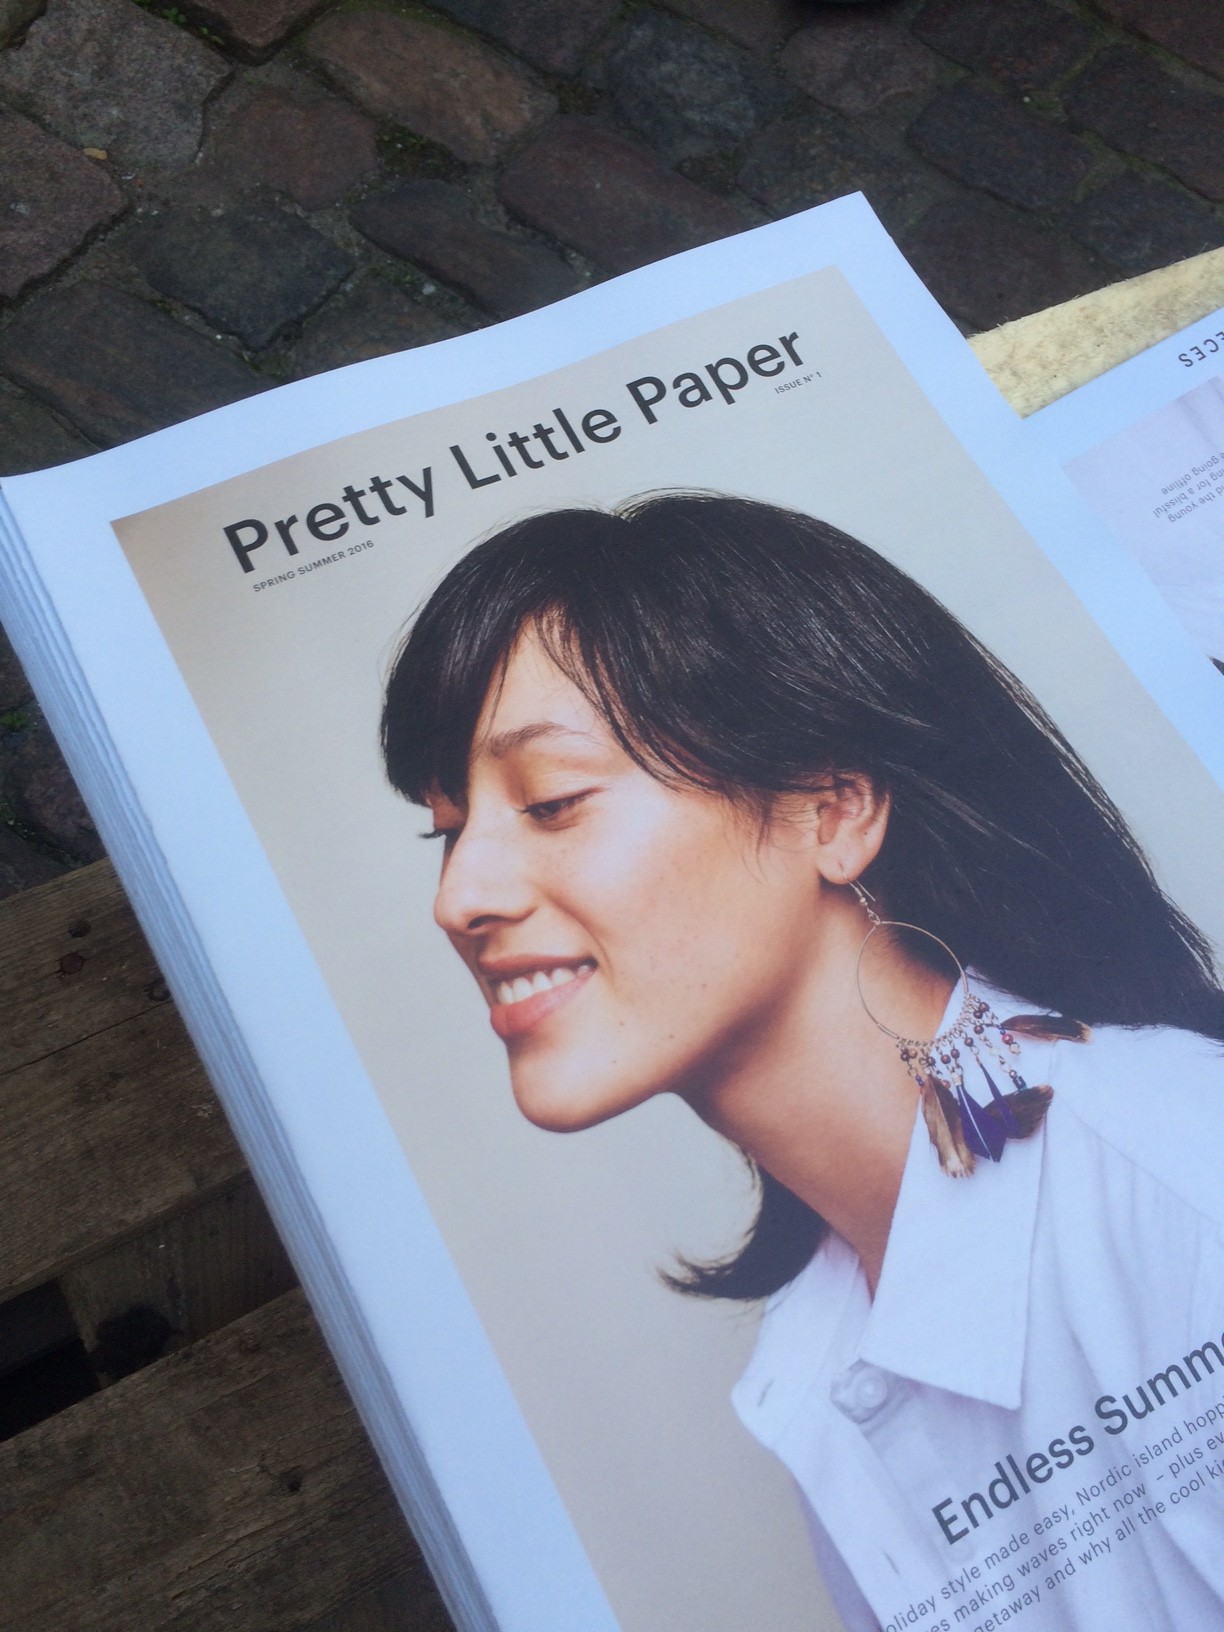 COVER PIECES EVENT AARHUS SPECIAL PRETTY LITTLE PIECES LONELY PLANET